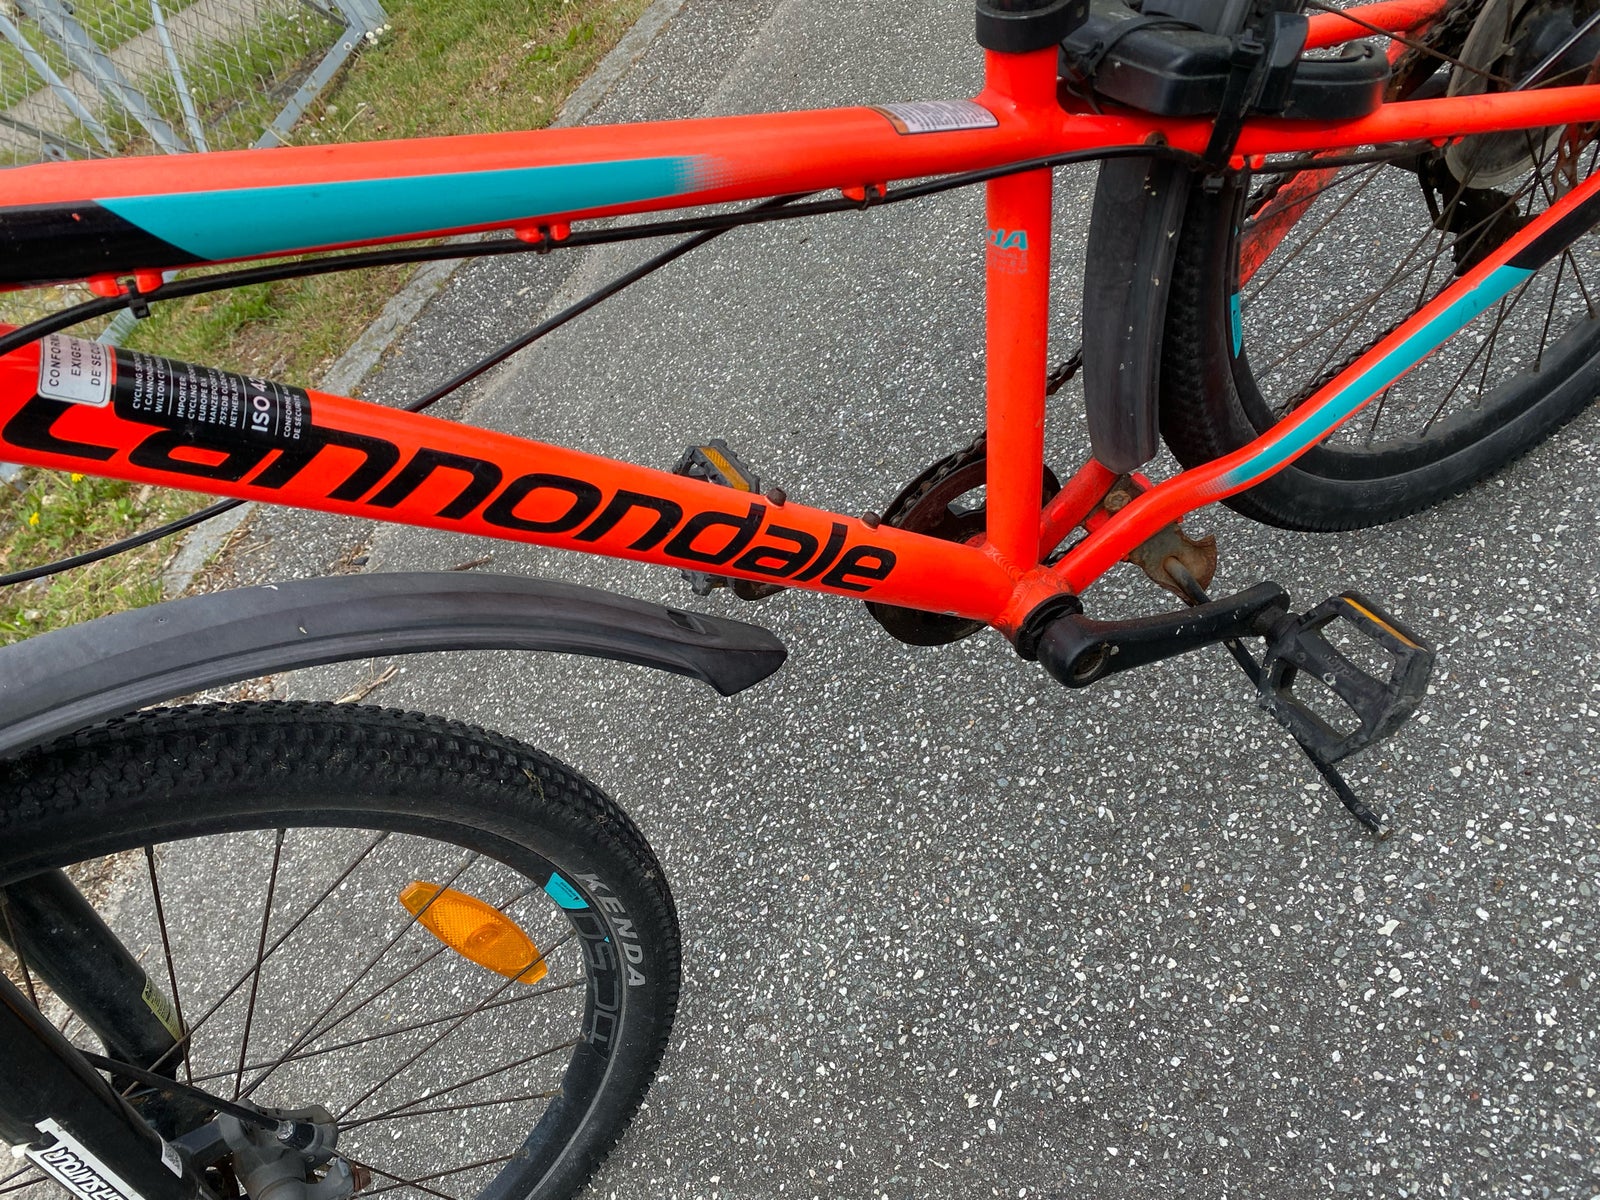 Cannondale, anden mountainbike, 24 tommer